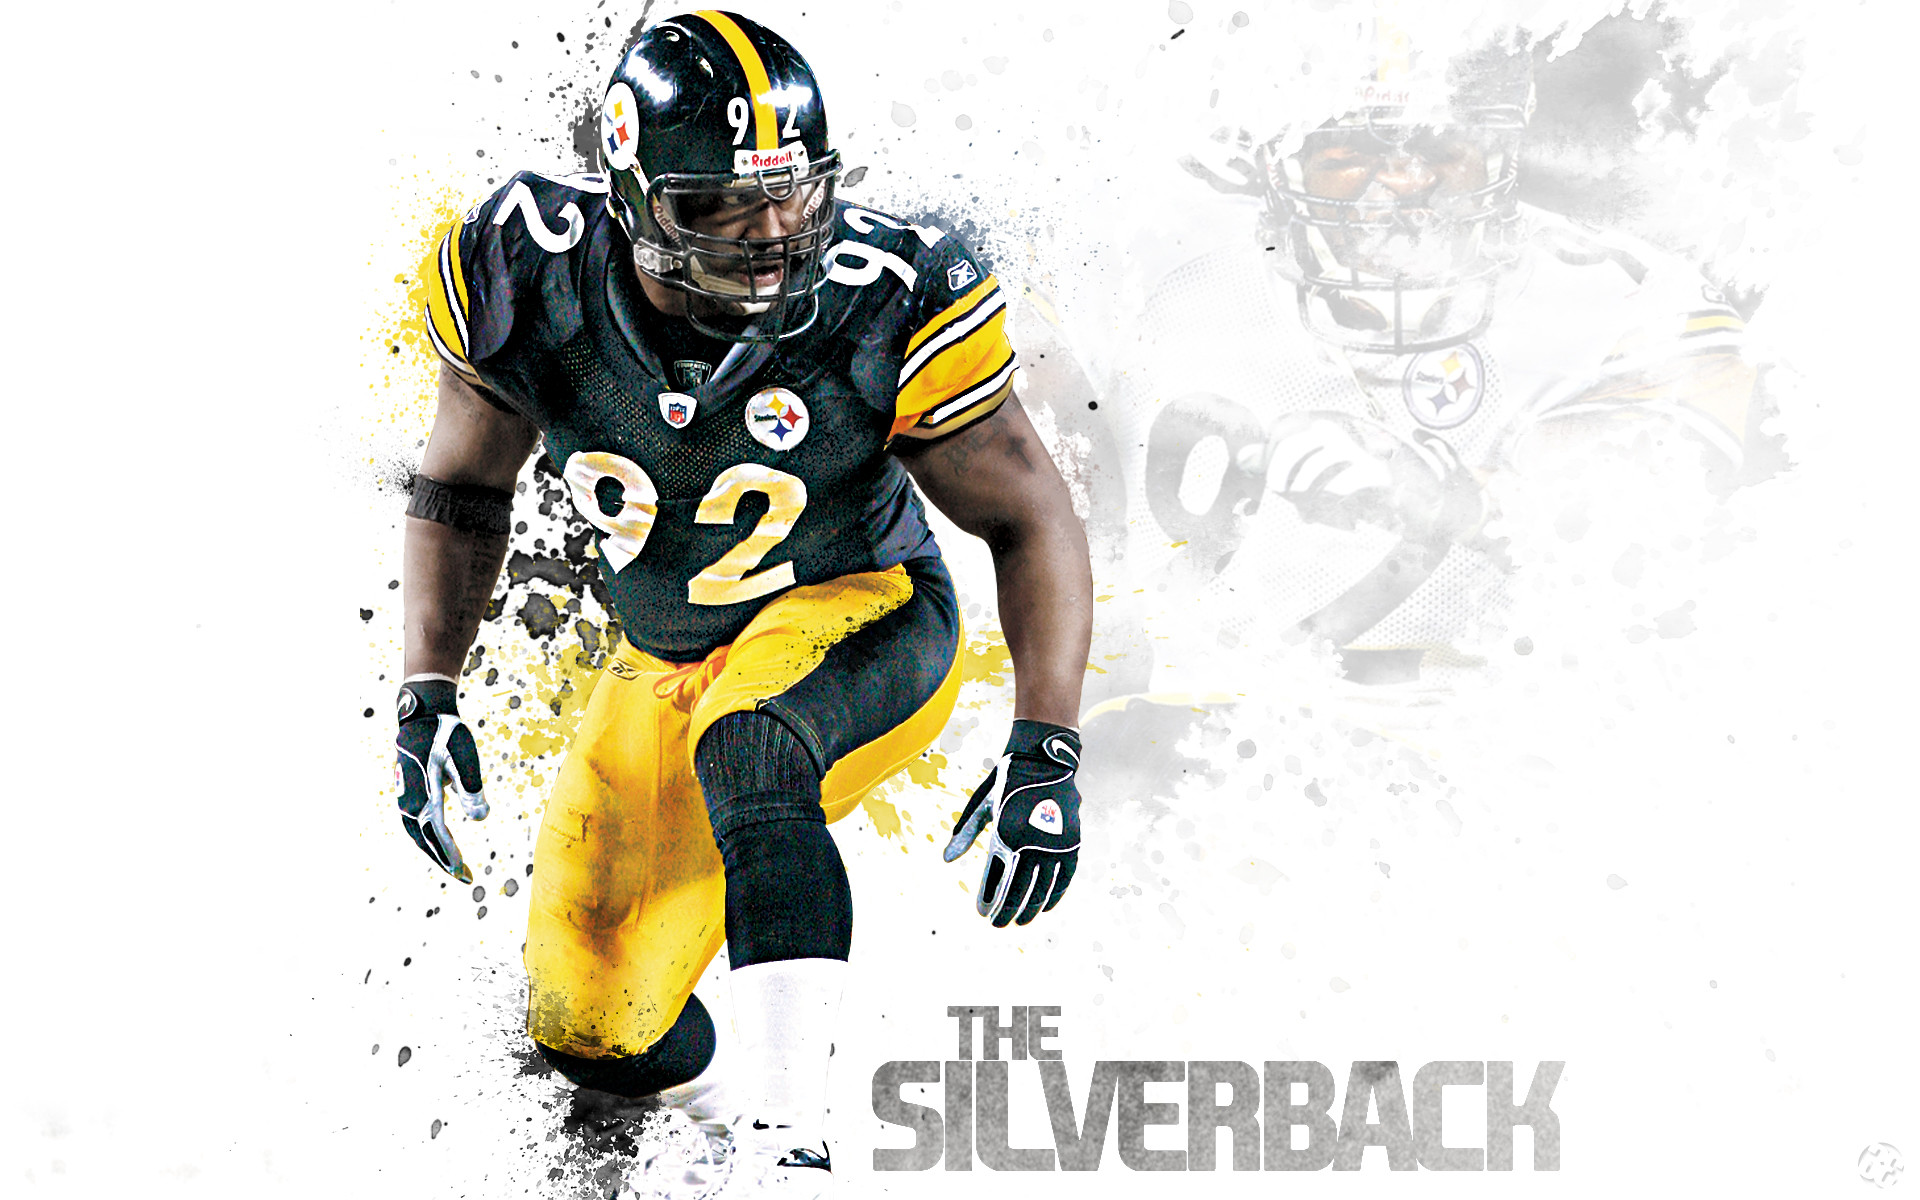 Abstract Steelers Wallpapers